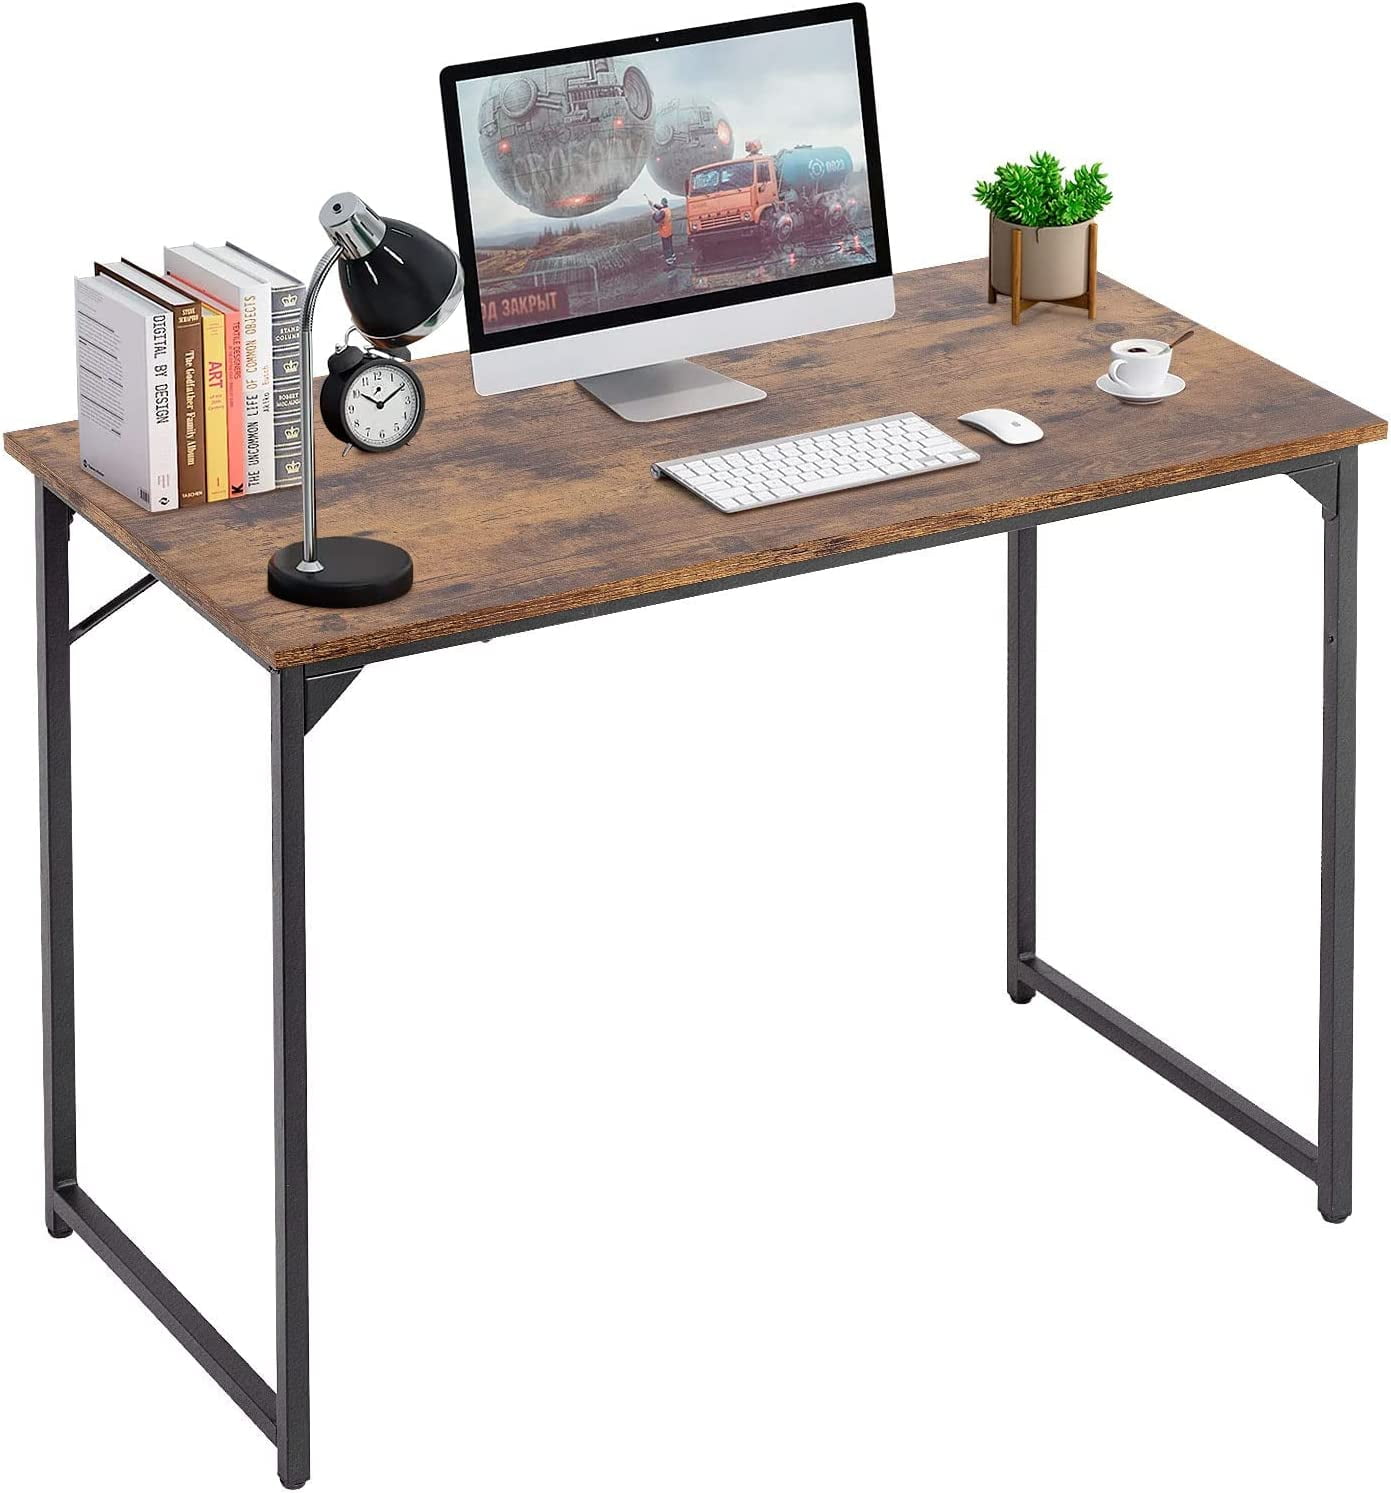 PayLessHere 47 inch Computer Desk Gaming Desk Multi-Function Writing Table  Student Art Modren Simple Style PC Wood and Metal Desk Workstation, Black